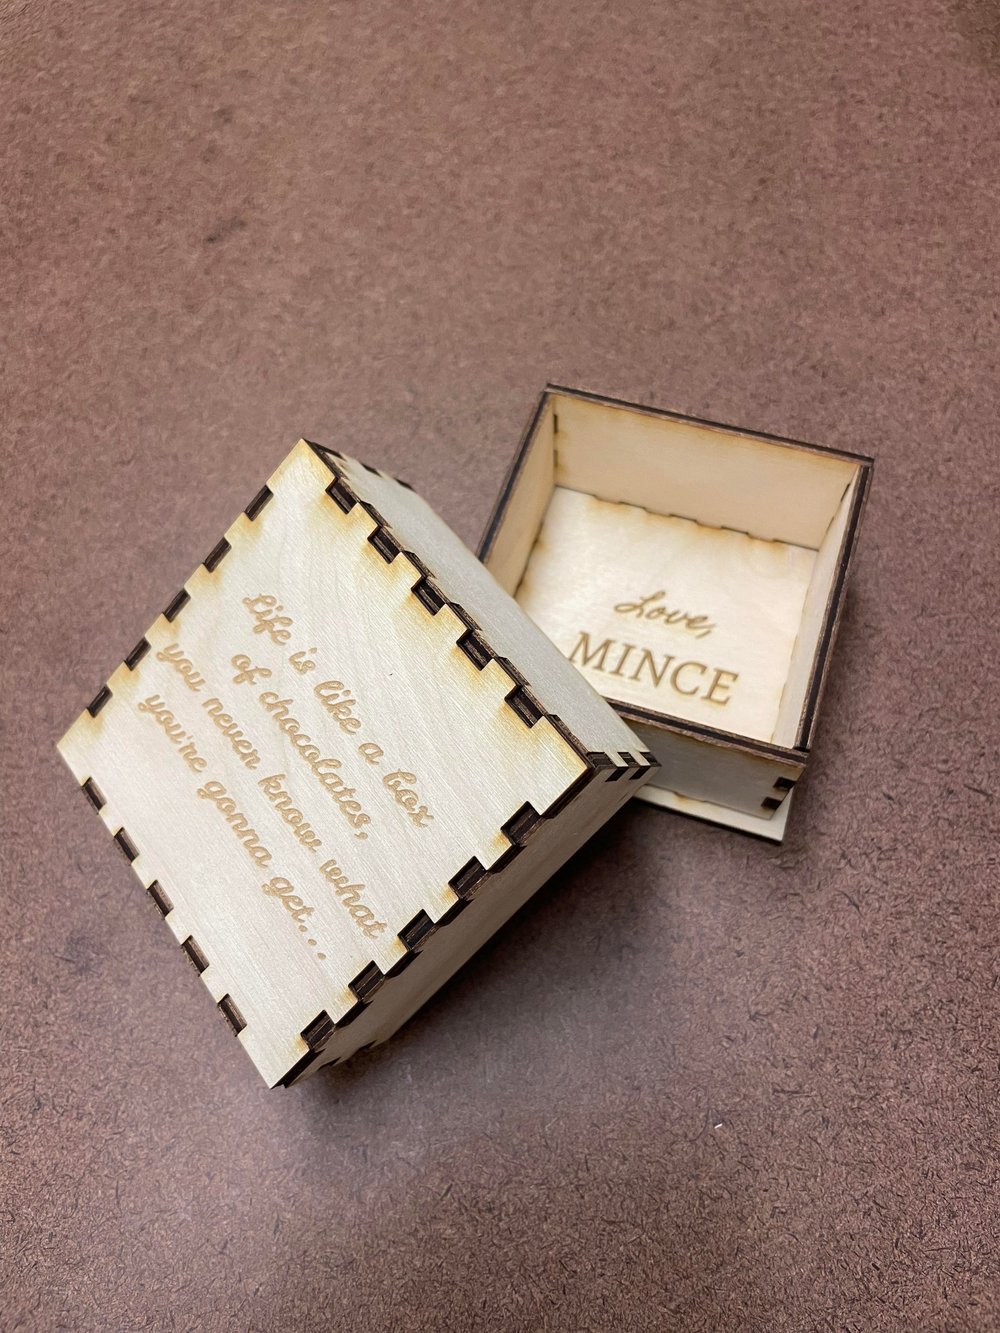 Custom laser-cut box with engraving, made by head chef Michael Chen :)